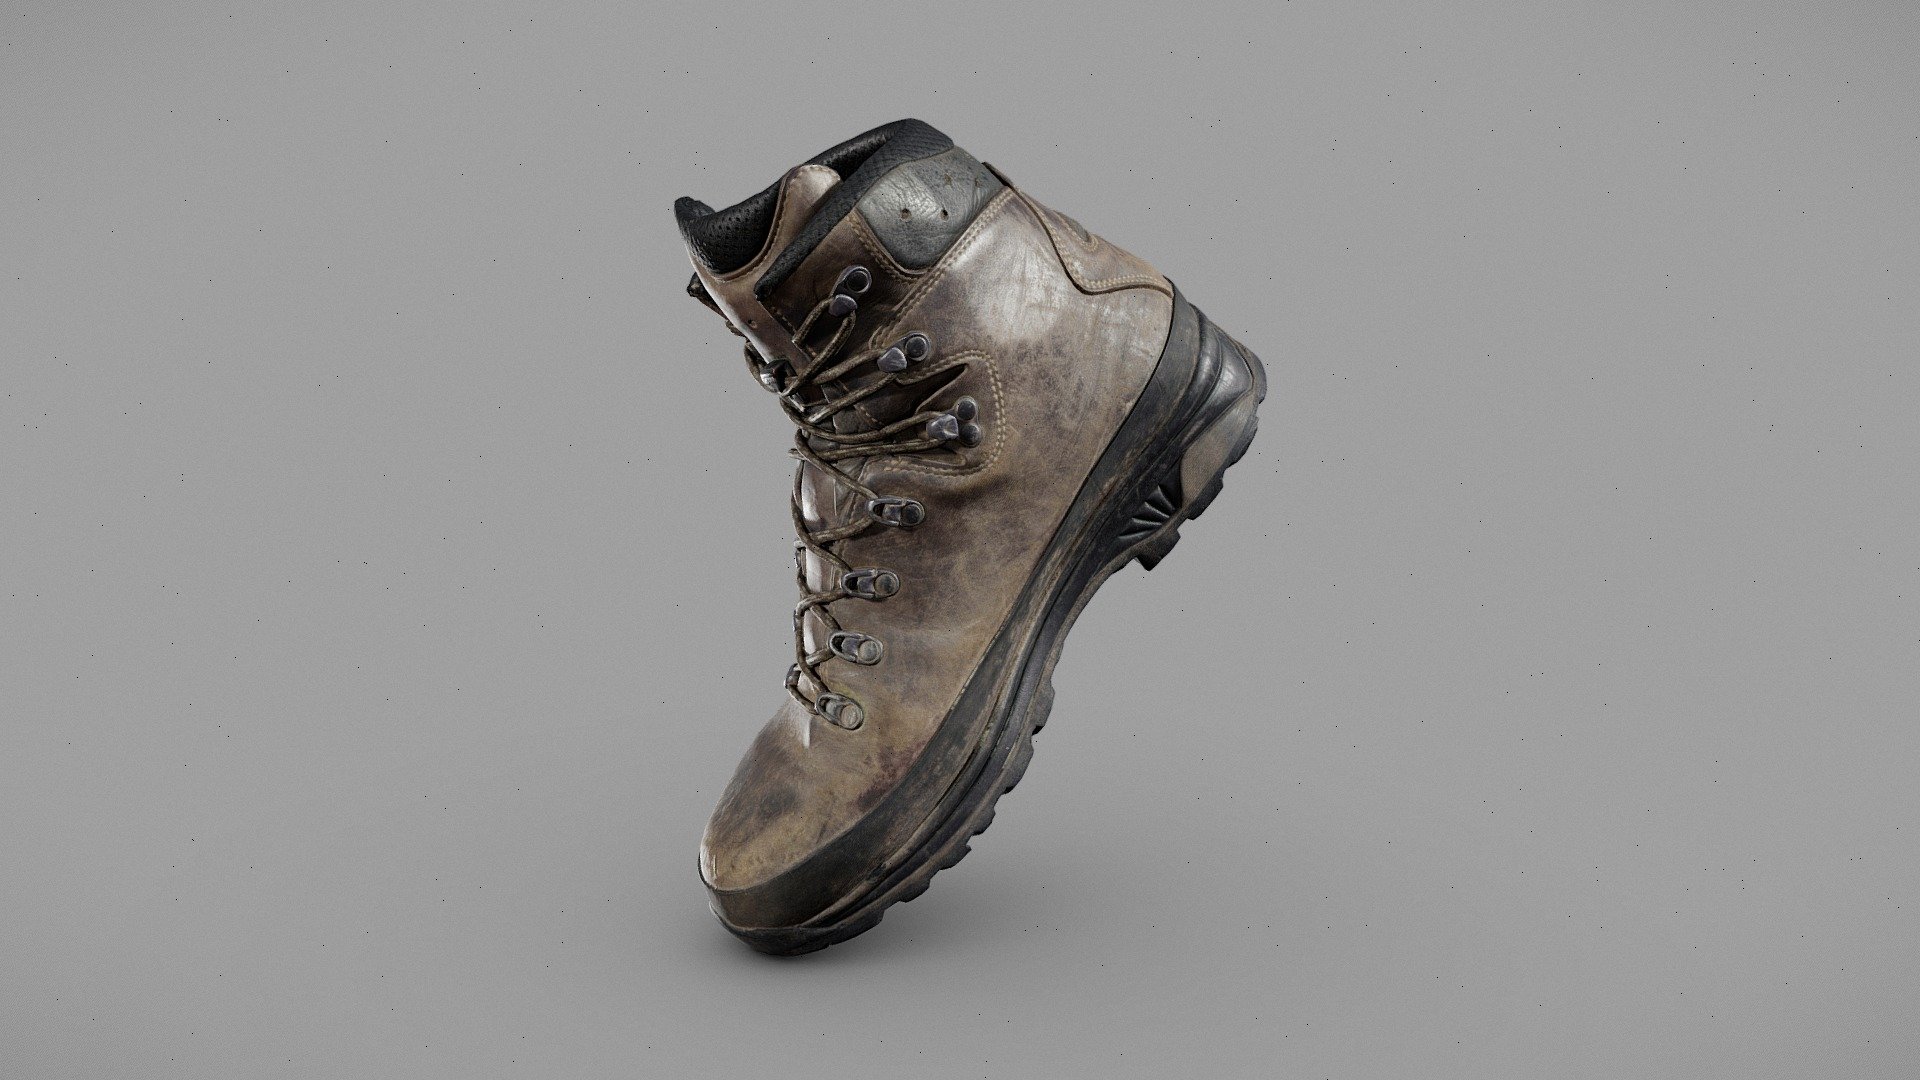 Lowa Mens Tibet Gore-Tex Leather Boot




Free 2021 version available @ https://skfb.ly/o67Bo



100% LOWA Leather boot with rubber sole, Gore-Tex lining and Vibram Masai outsole.

30.4 x 11.3 x 22.5 cm (65 micrometers per texel @ 8k)

Scanned using advanced technology developed by inciprocal Inc. that enables highly photo-realistic reproduction of real-world products in virtual environments. Our hardware and software technology combines advanced photometry, structured light, photogrammtery and light fields to capture and generate accurate material representations from tens of thousands of images targeting real-time and offline path-traced PBR compatible renderers.

Zip file includes low-poly OBJ mesh (in meters) with a set of 8k PBR textures compressed with lossless JPEG (no chroma sub-sampling).

ArtStation @ https://www.artstation.com/artwork/qQ1v0R



 - Old Lowa Gore-Tex Boot (2022) - Buy Royalty Free 3D model by inciprocal (@inciprocal.com) 3d model